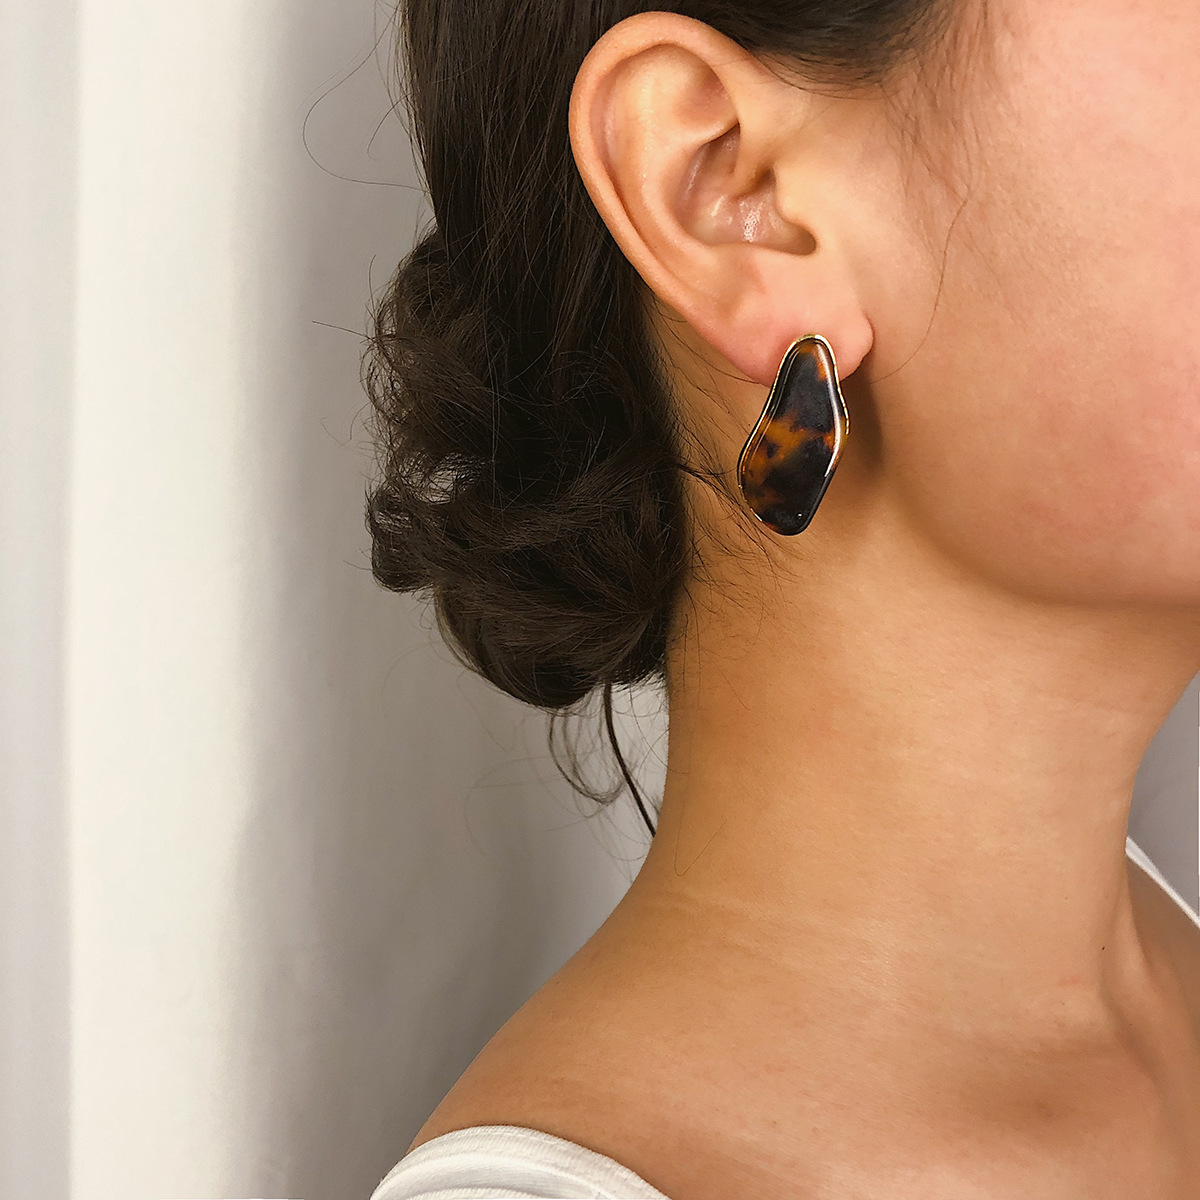 Small and simple acetate retro earrings...